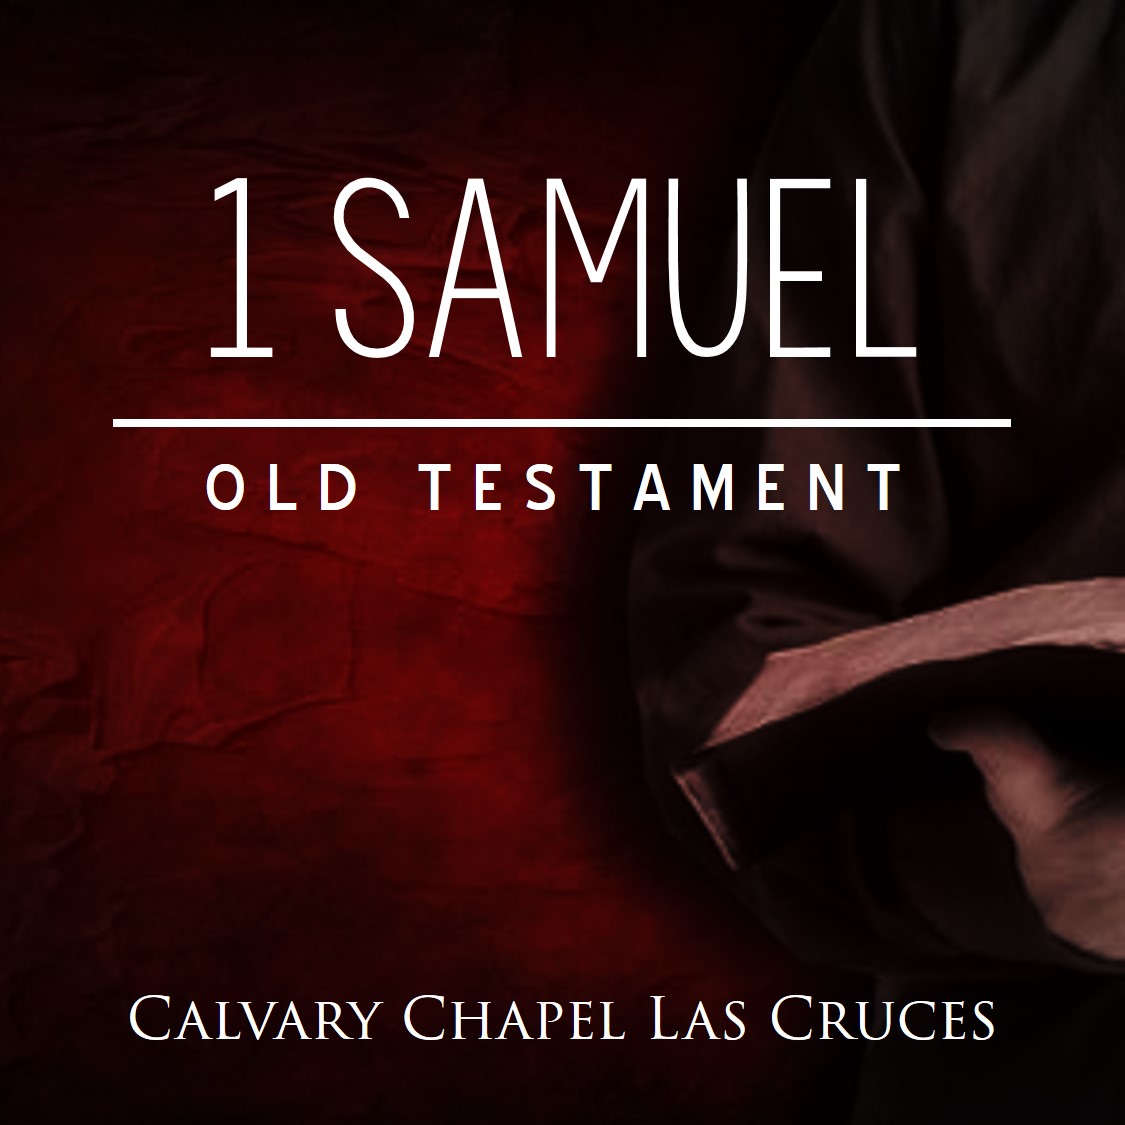 1 Samuel Chapter 17 - "Young David vs Giant Goliath"